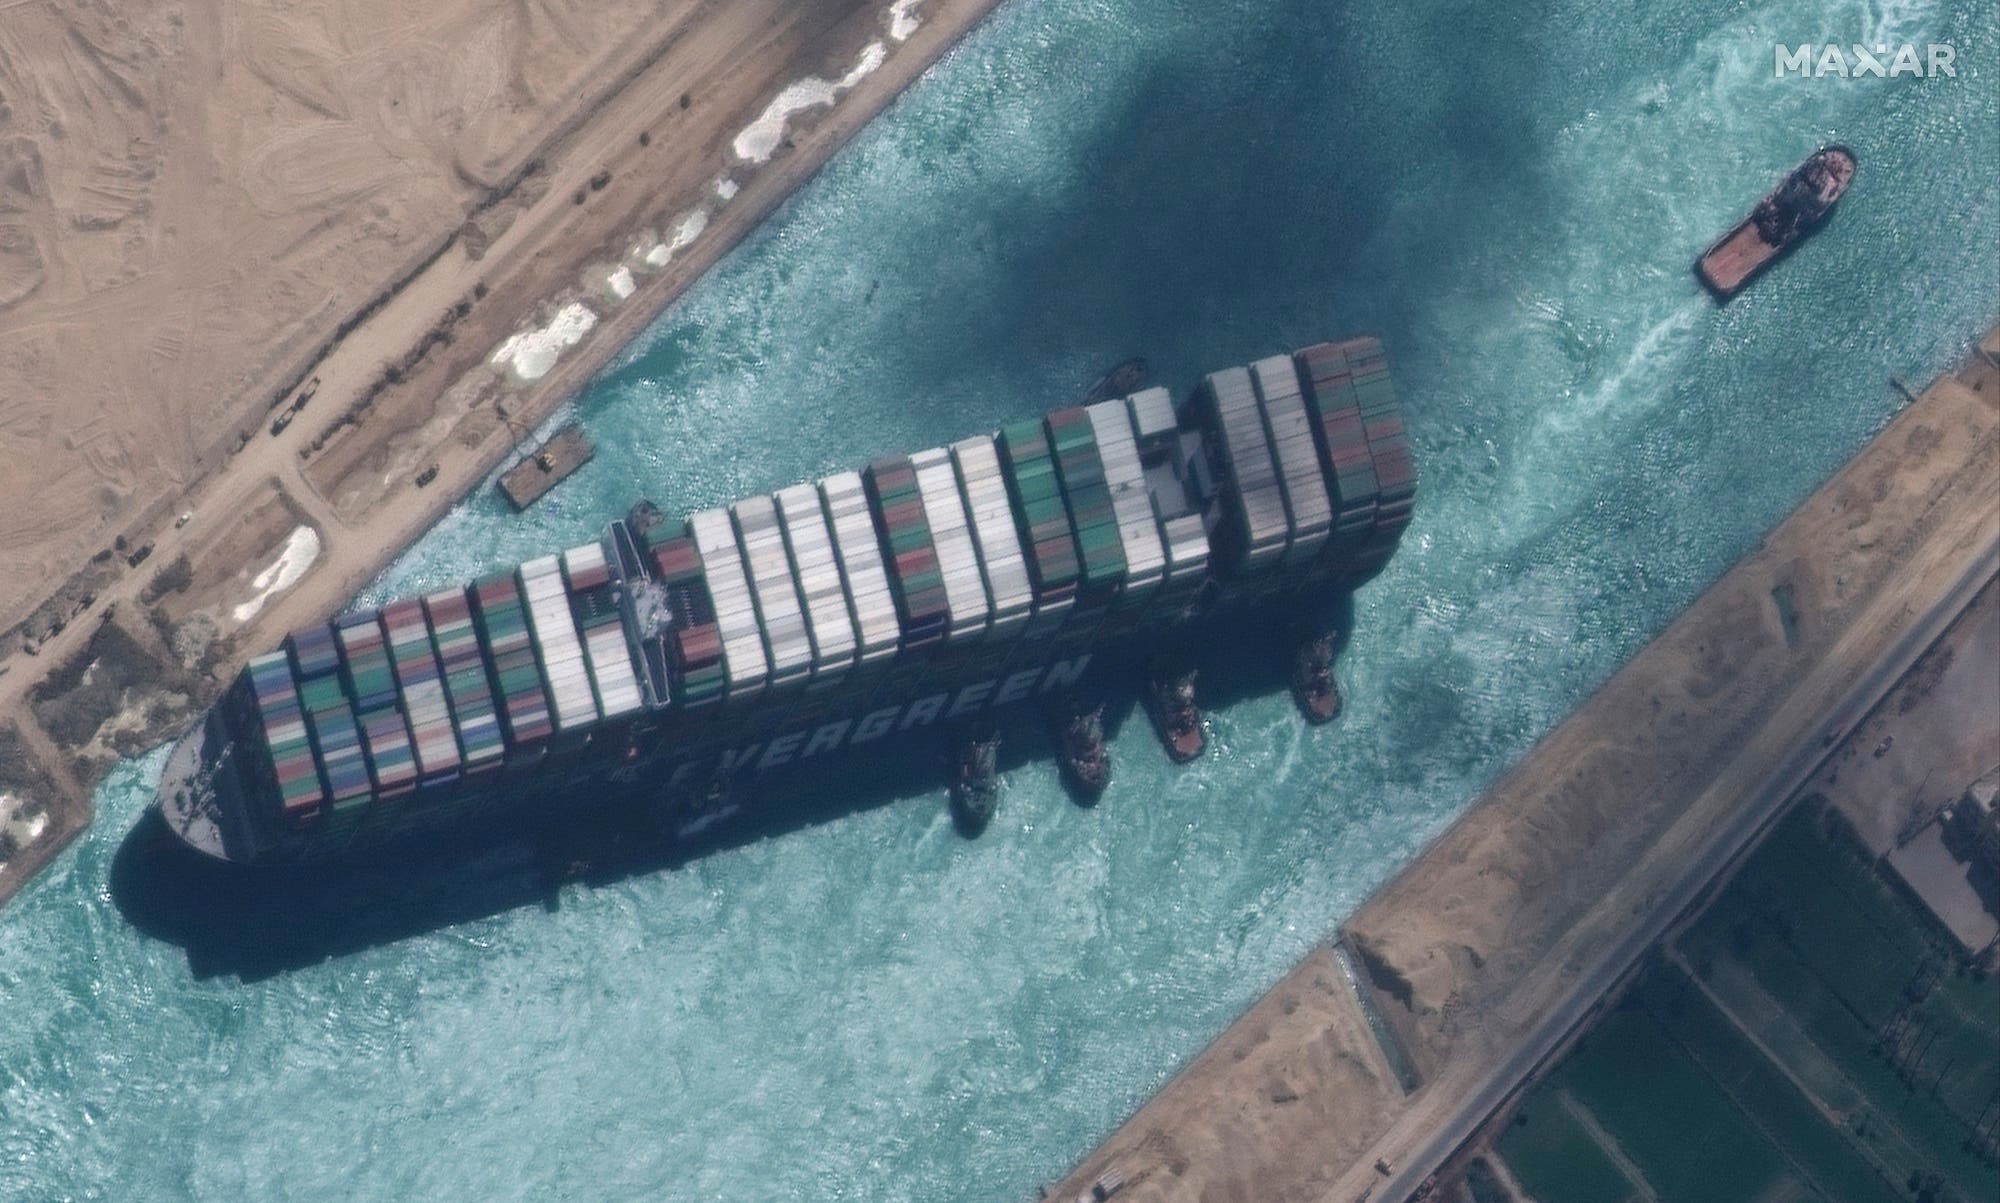 Satellite photo of the Evergreen ship and tugs in the Suez Canal on March 29, 2021